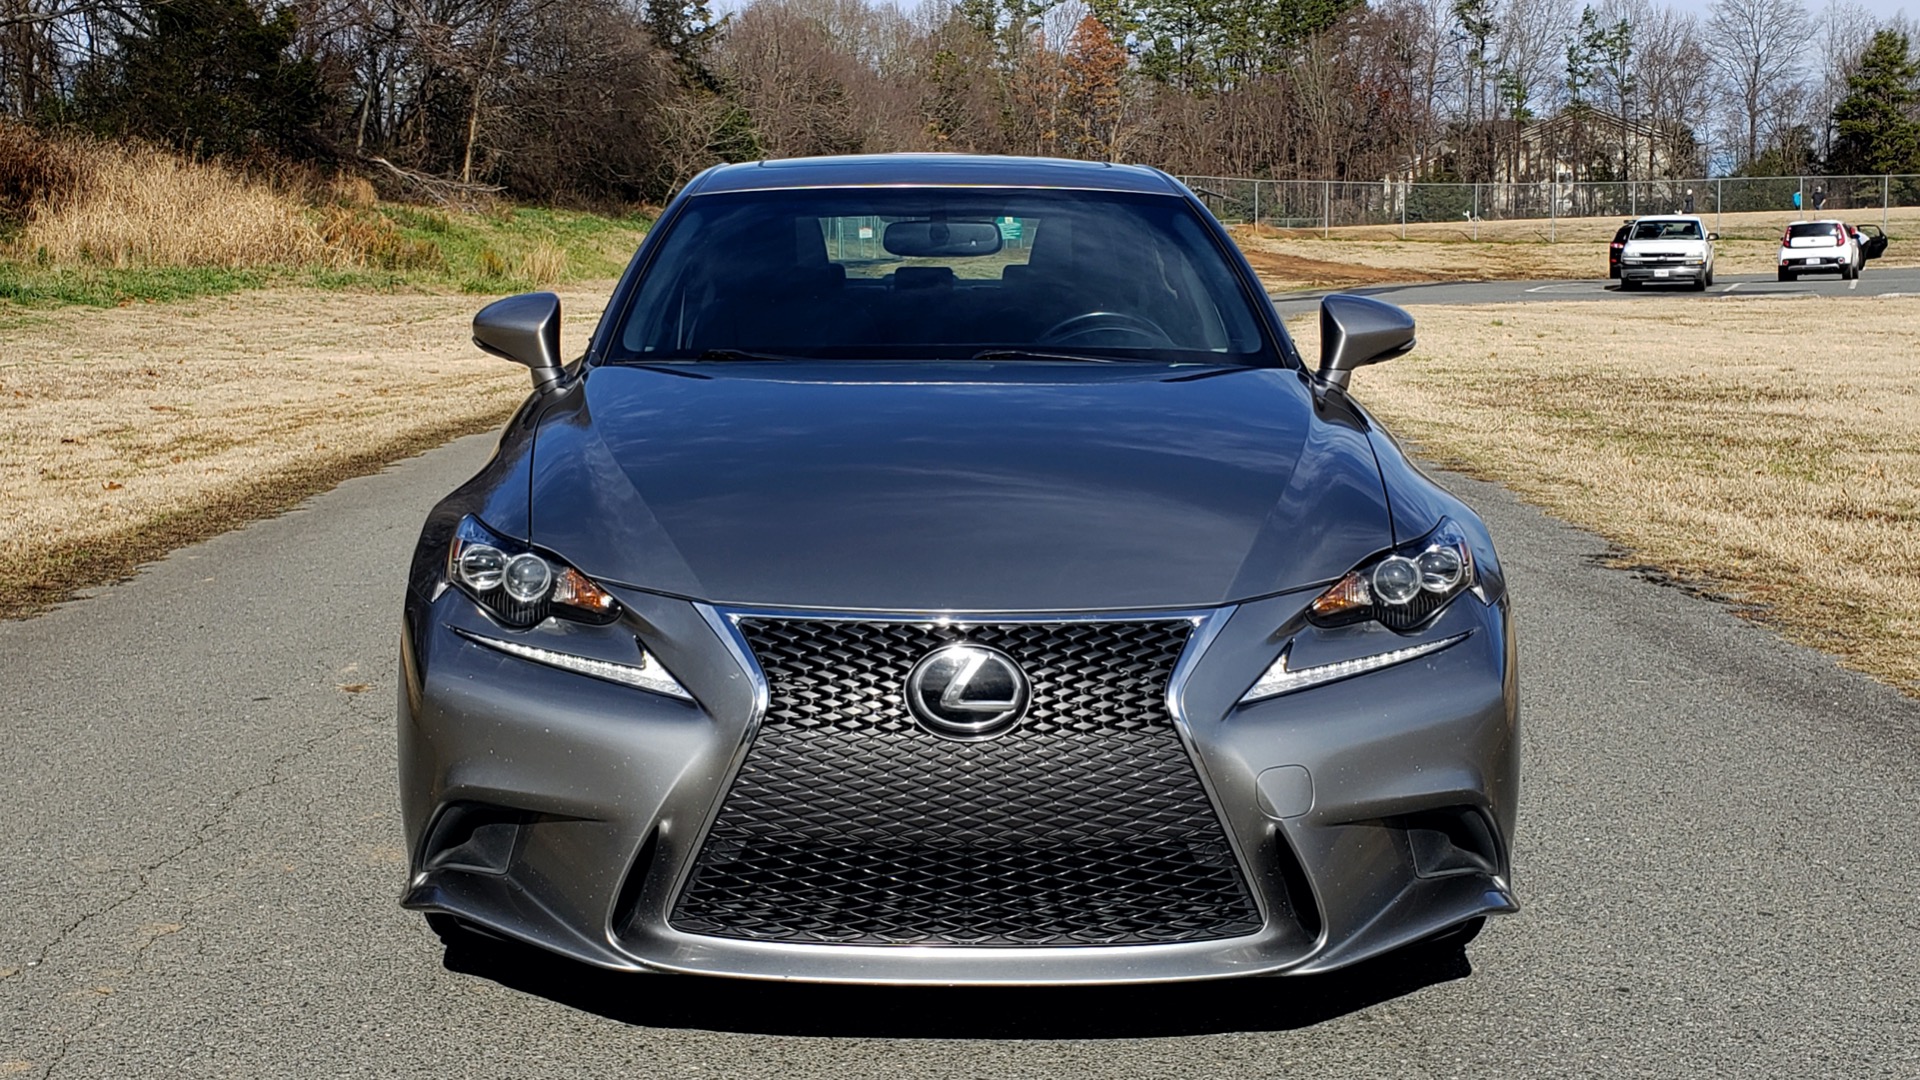 Used 2016 Lexus IS 200t F-SPORT / SUNROOF / NAV / BSM / DYNAMIC RADAR CRUISE for sale Sold at Formula Imports in Charlotte NC 28227 23